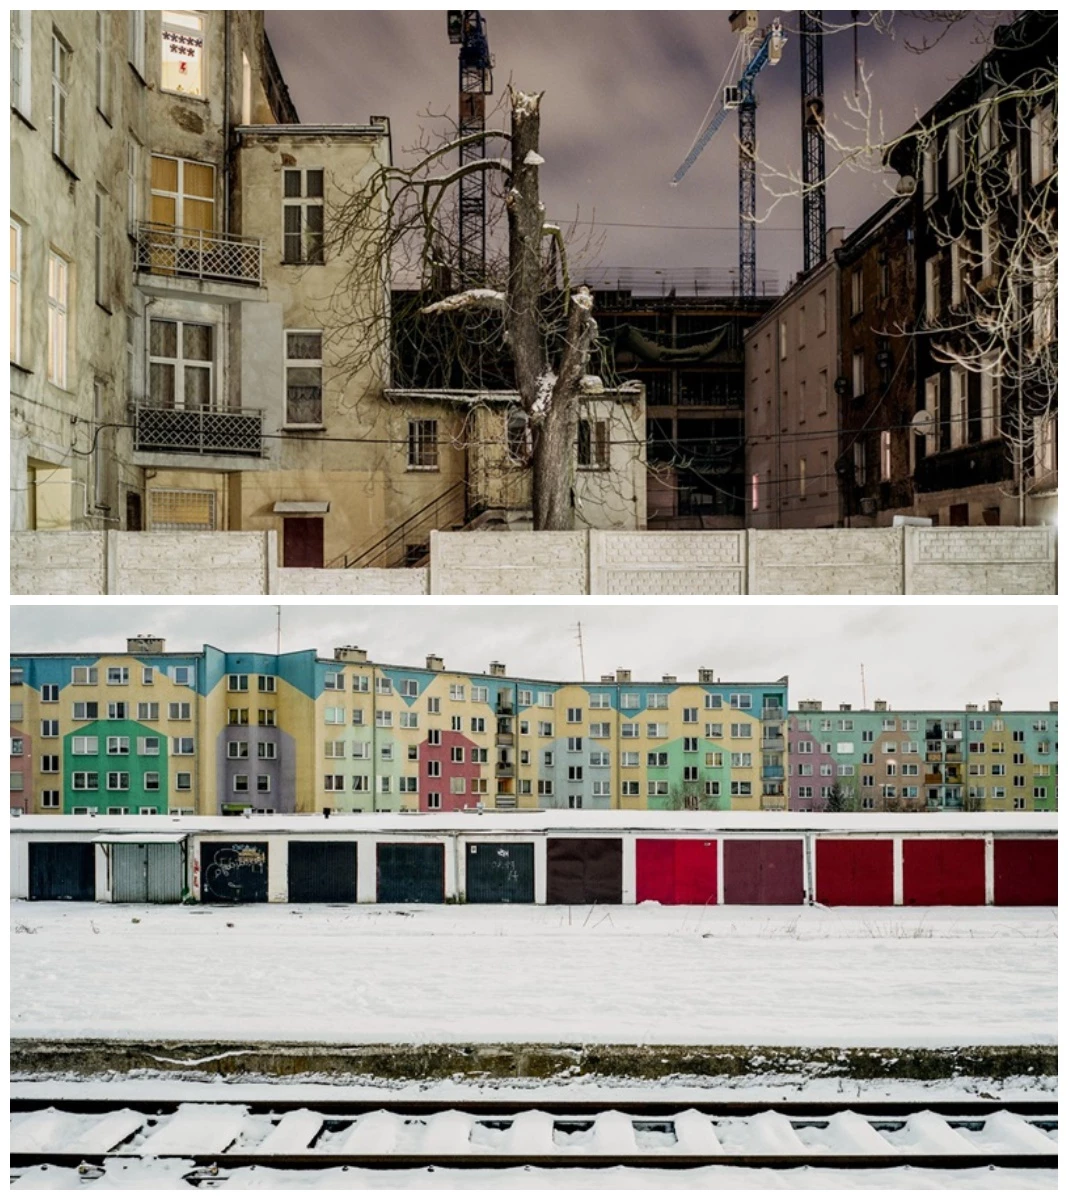 Photo collage. At the top: A photo of old tenements, with a withered, broken tree and construction cranes in the background; at the bottom: a photo of snow-covered railway tracks. In the background are garages with colorful doors, and behind them blocks of flats in equally bright colors.